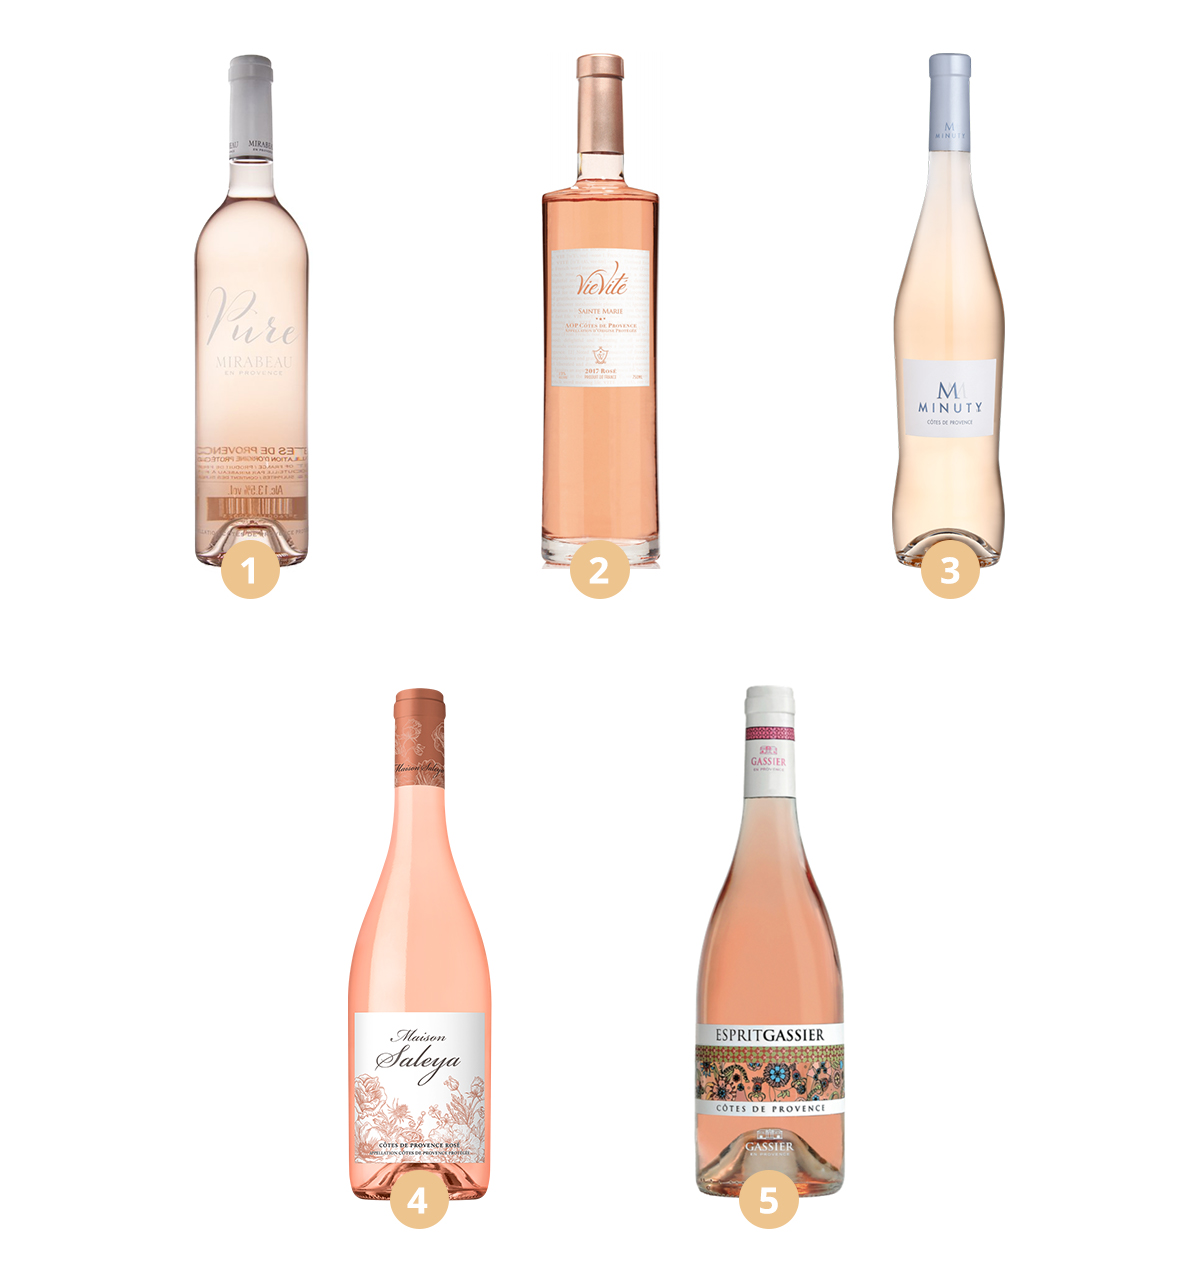 Rosé from Provence